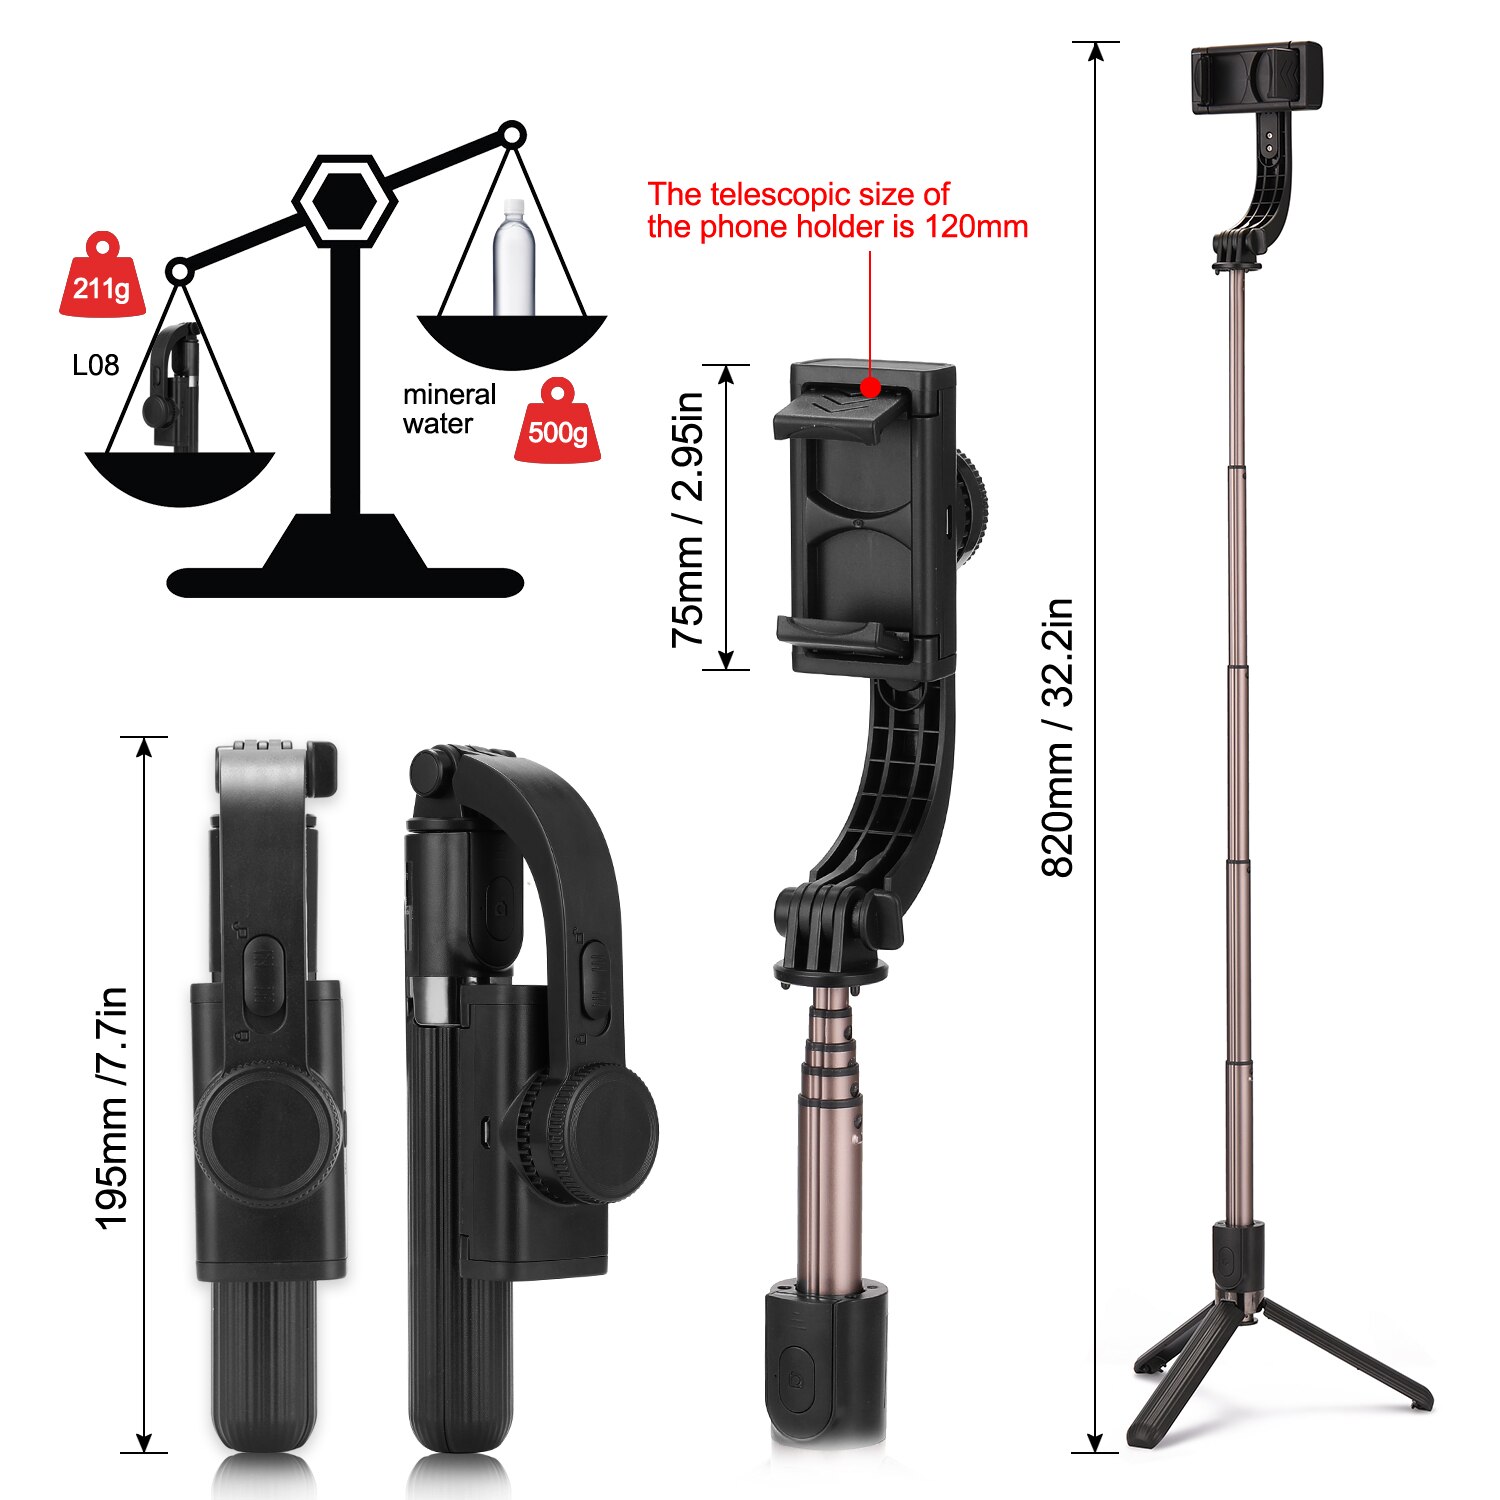 Handheld Mobile Phone Stabilizer Anti-Shake Phone Tripod With BT Remote Control Selfie Stick for Smartphone Photography